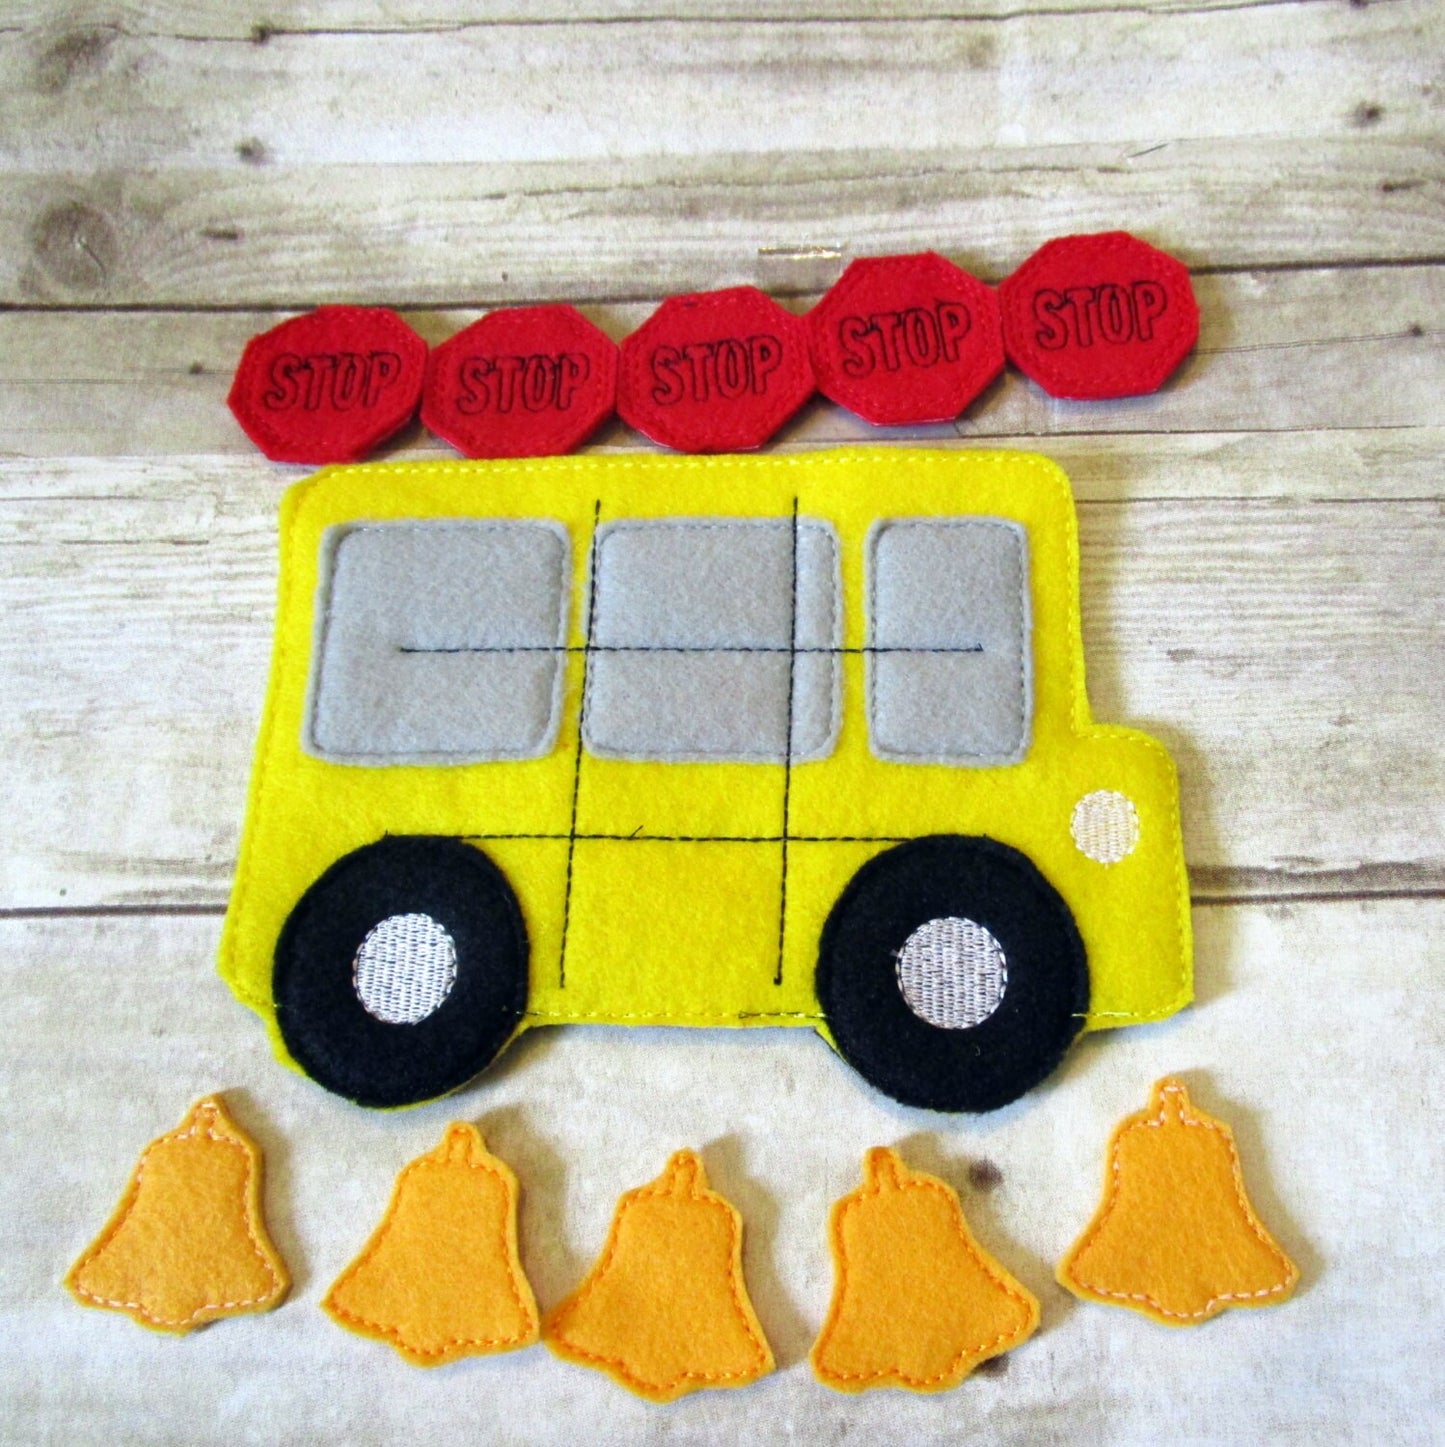 Handcrafted school bus theme tic tac toe game for boys and girls. Can be used as a gift or party favor.